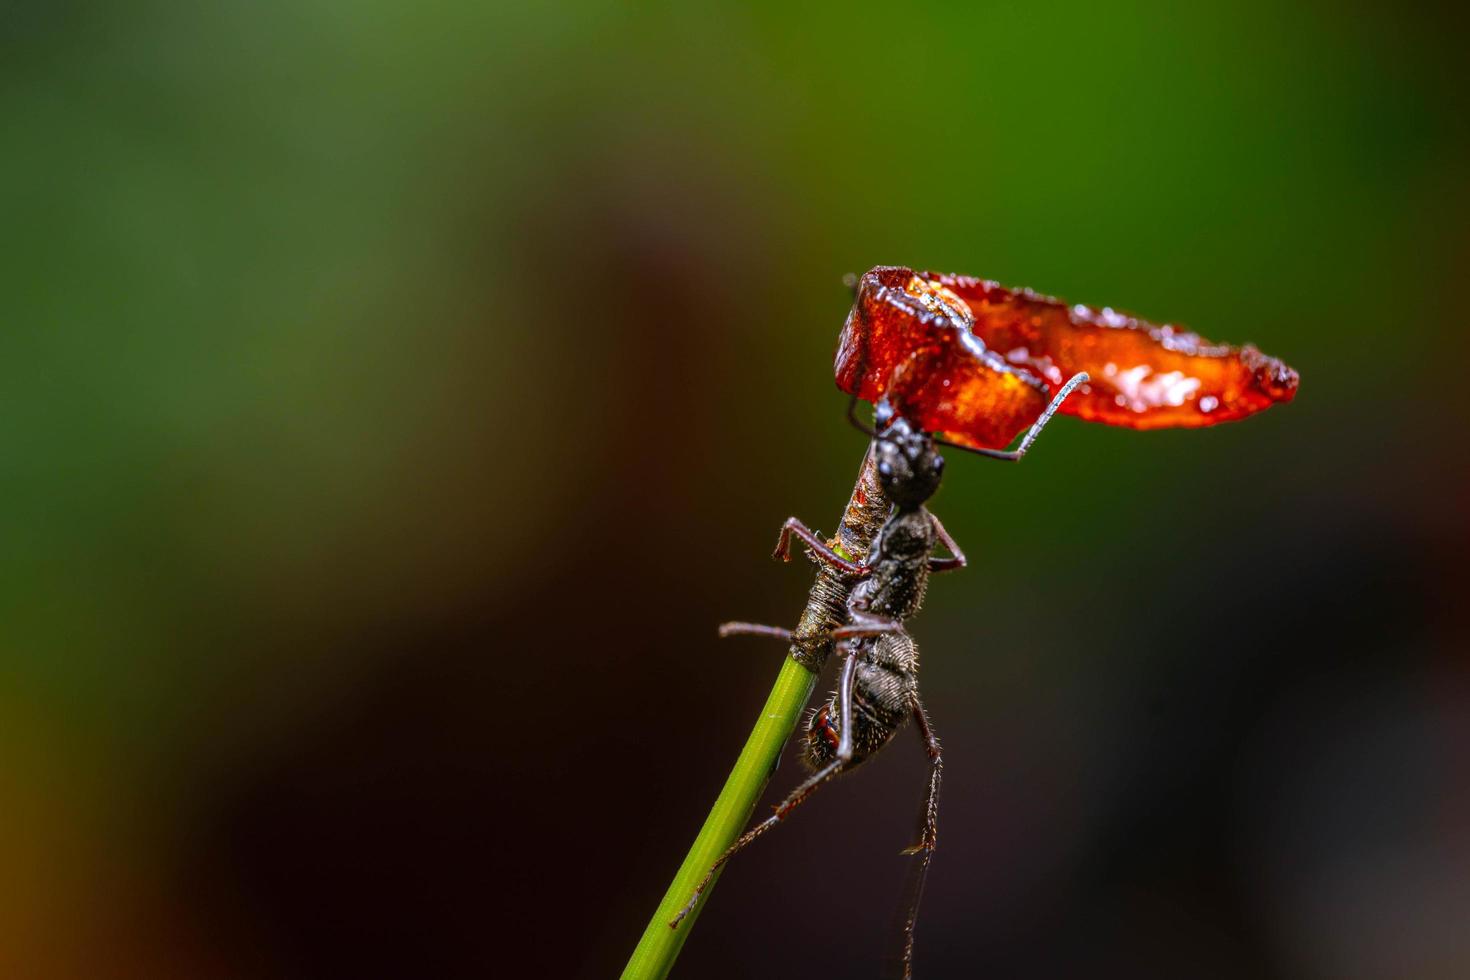 a black ant hanging to eat photo